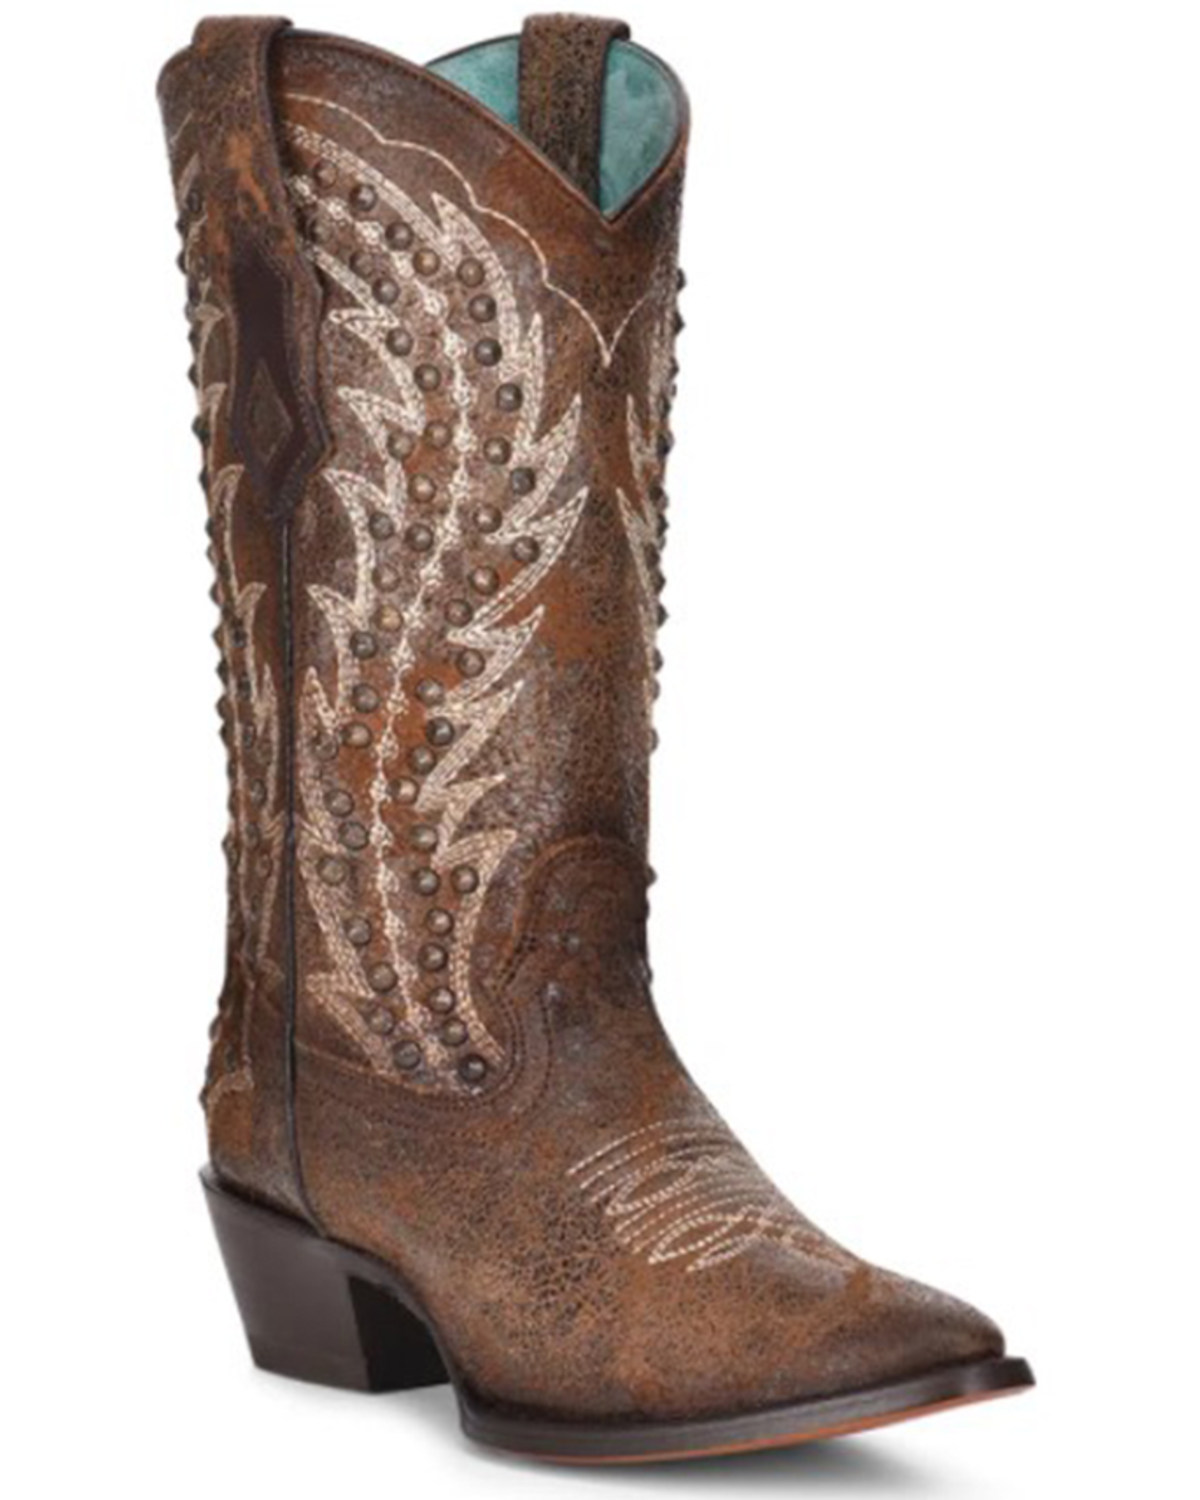 Corral Women's Studded Western Boots - Pointed Toe